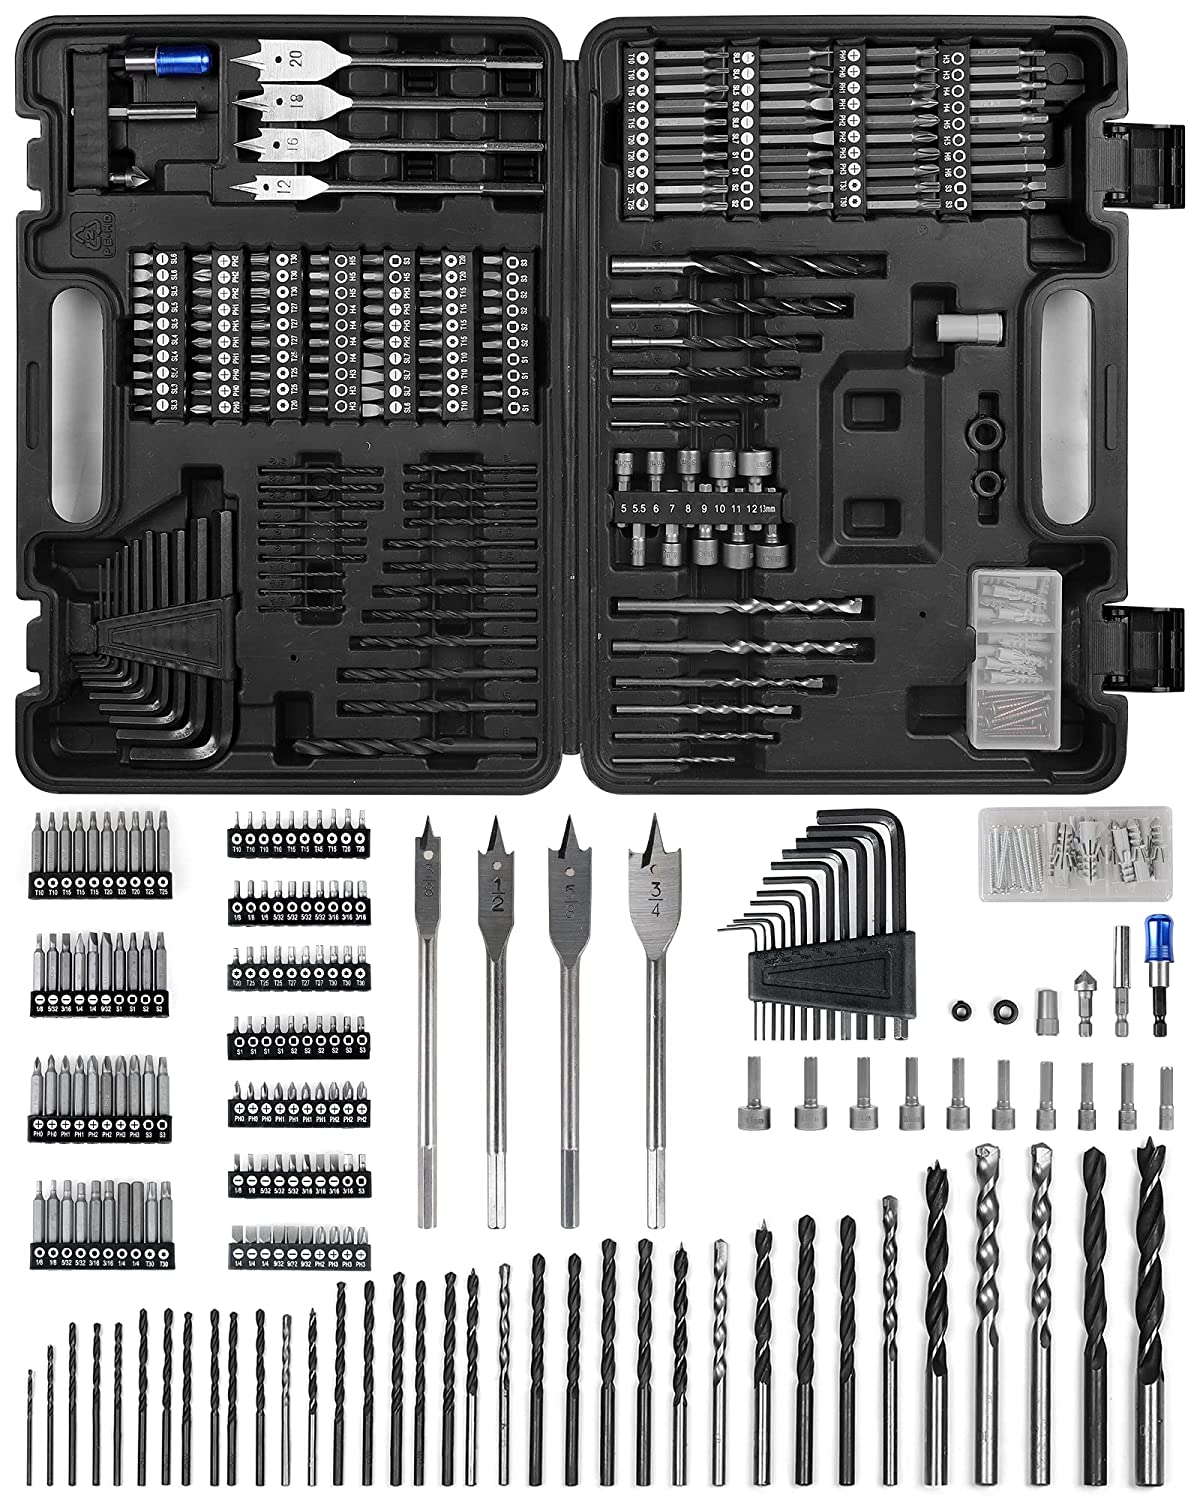 Impact Driver Drill/Screwdriver Bit Set, 201-Piece, for Wood Metal Cement Drilling and Screwdriving